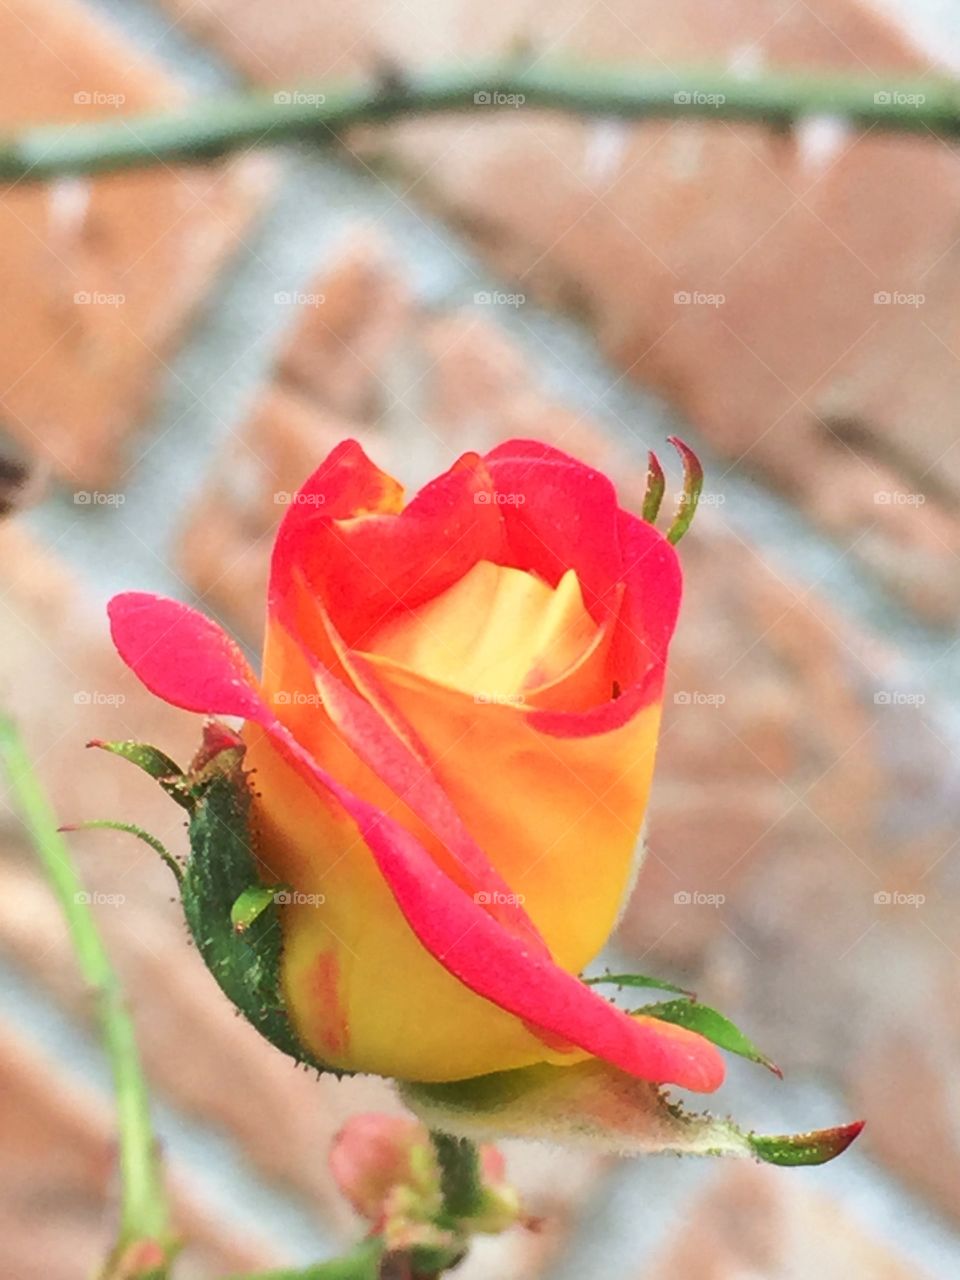 Orange and yellow rose bud in the garden 